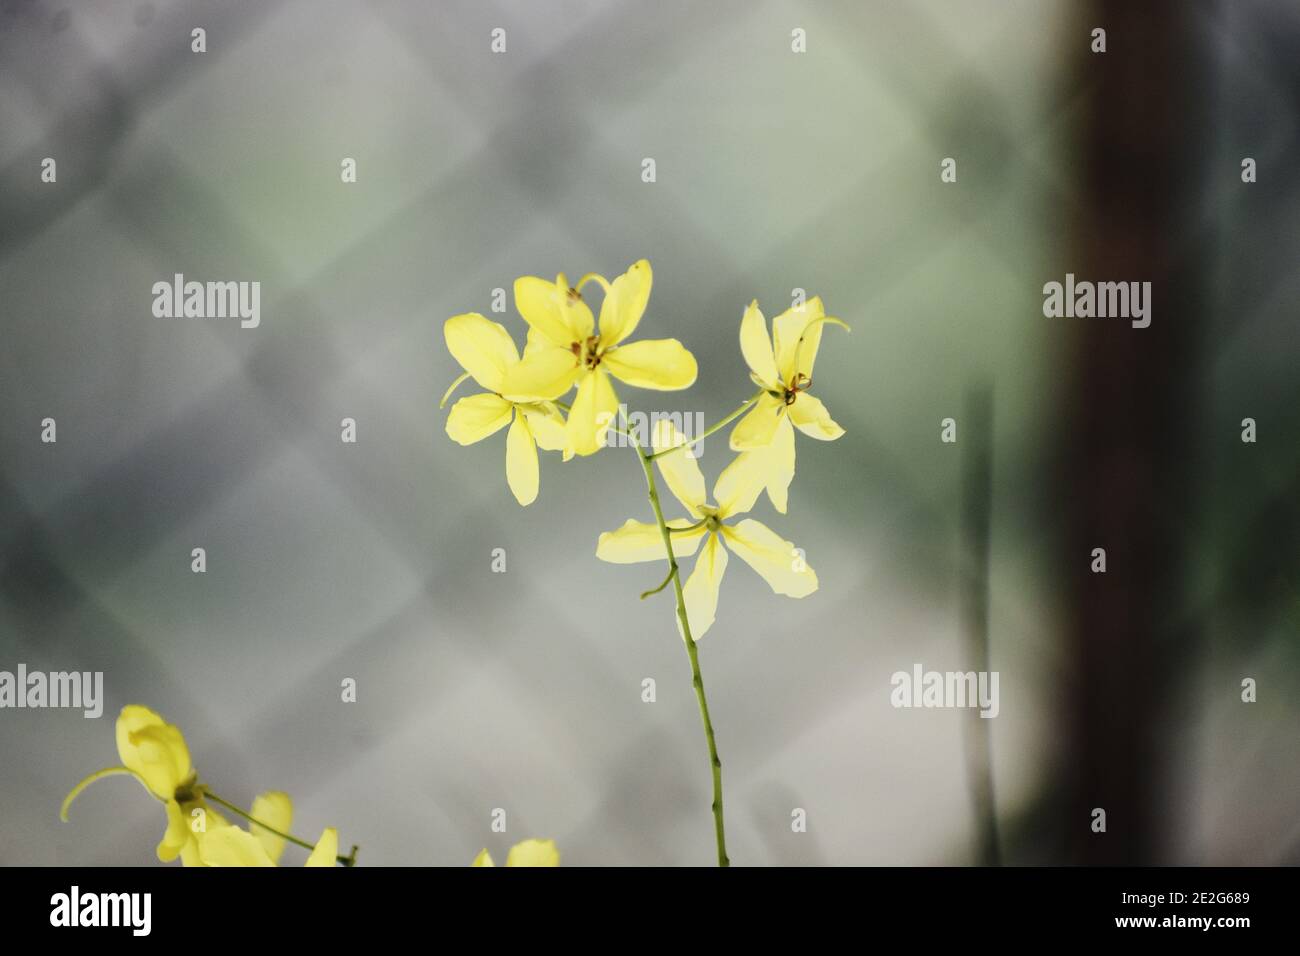 Selective focus shot of a bunch of Yellow Flowers with a metal fence on the background Stock Photo